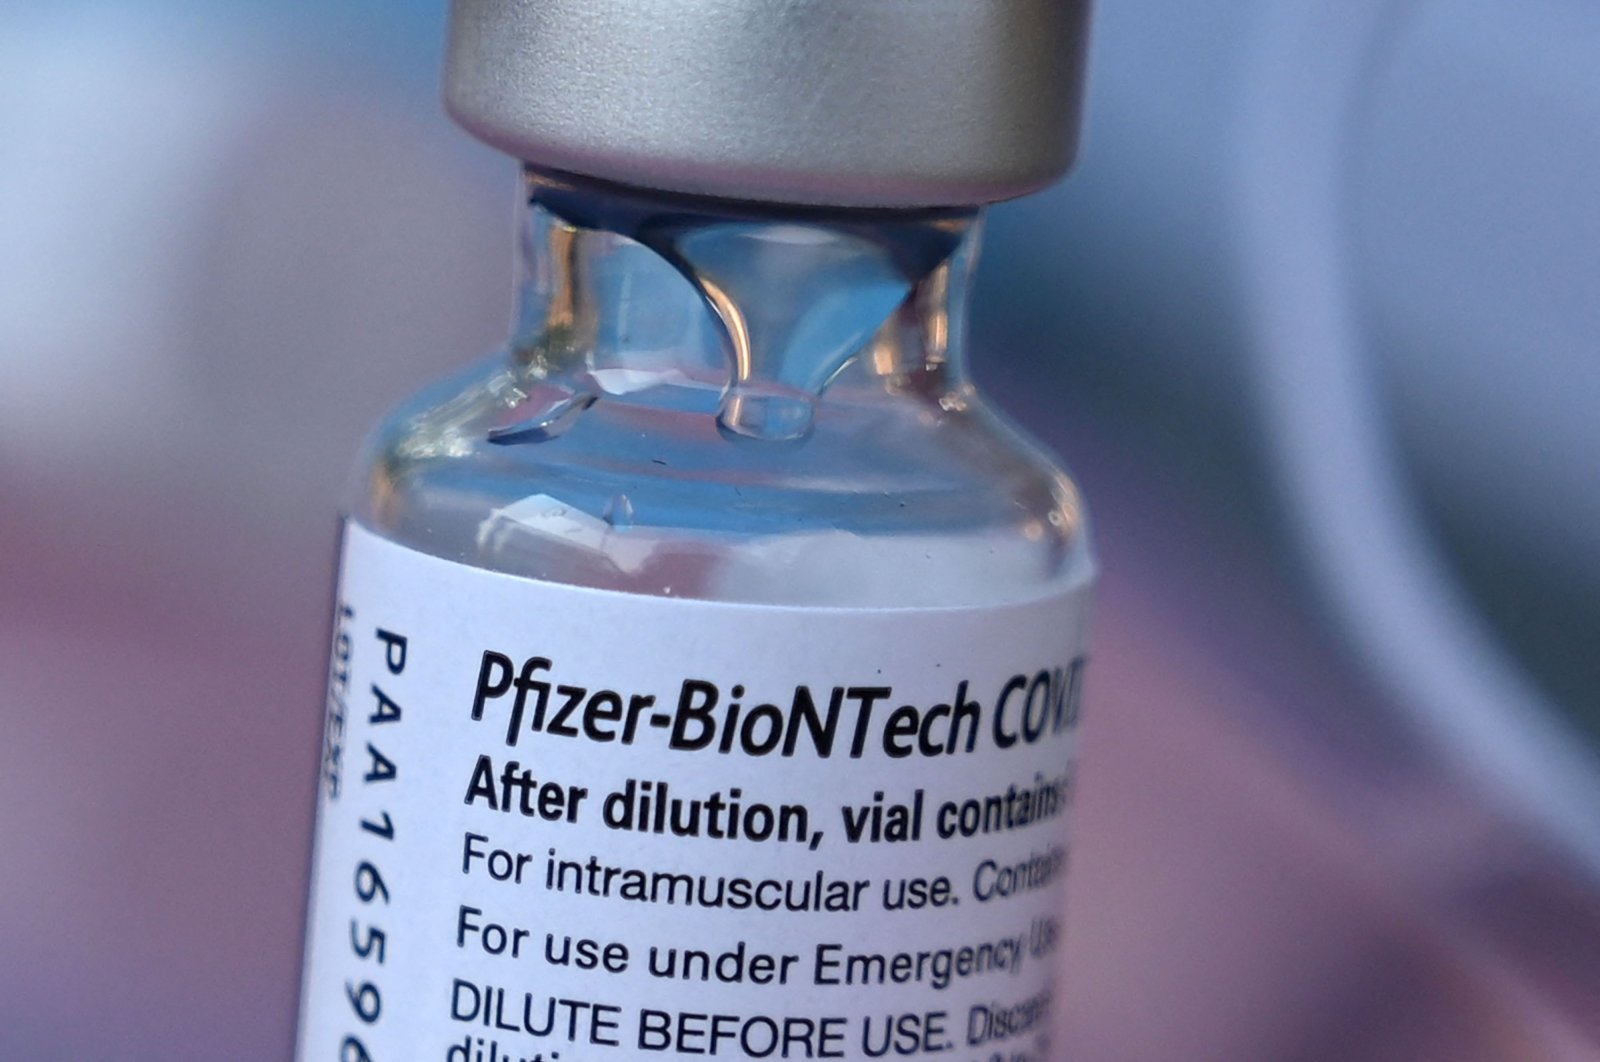 A vial of Pfizer-BioNTech COVID-19 vaccine is seen at a pop-up vaccine clinic in the Arleta neighborhood of Los Angeles, California, U.S., Aug. 23, 2021. (AFP Photo)